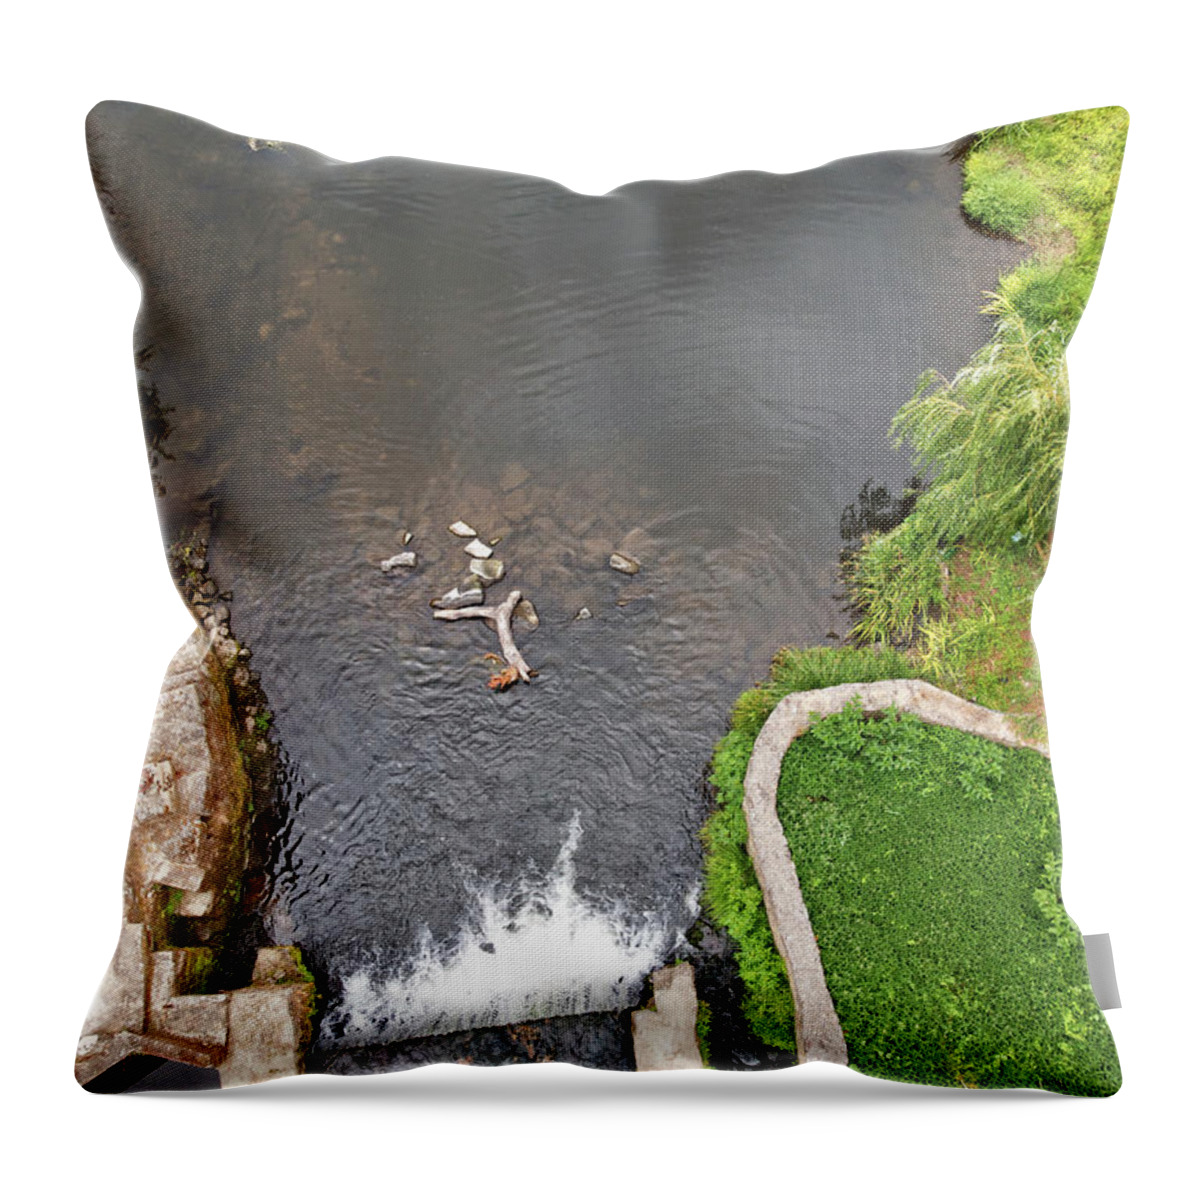 Waterfall Throw Pillow featuring the photograph River Waterfall by Paulo Goncalves